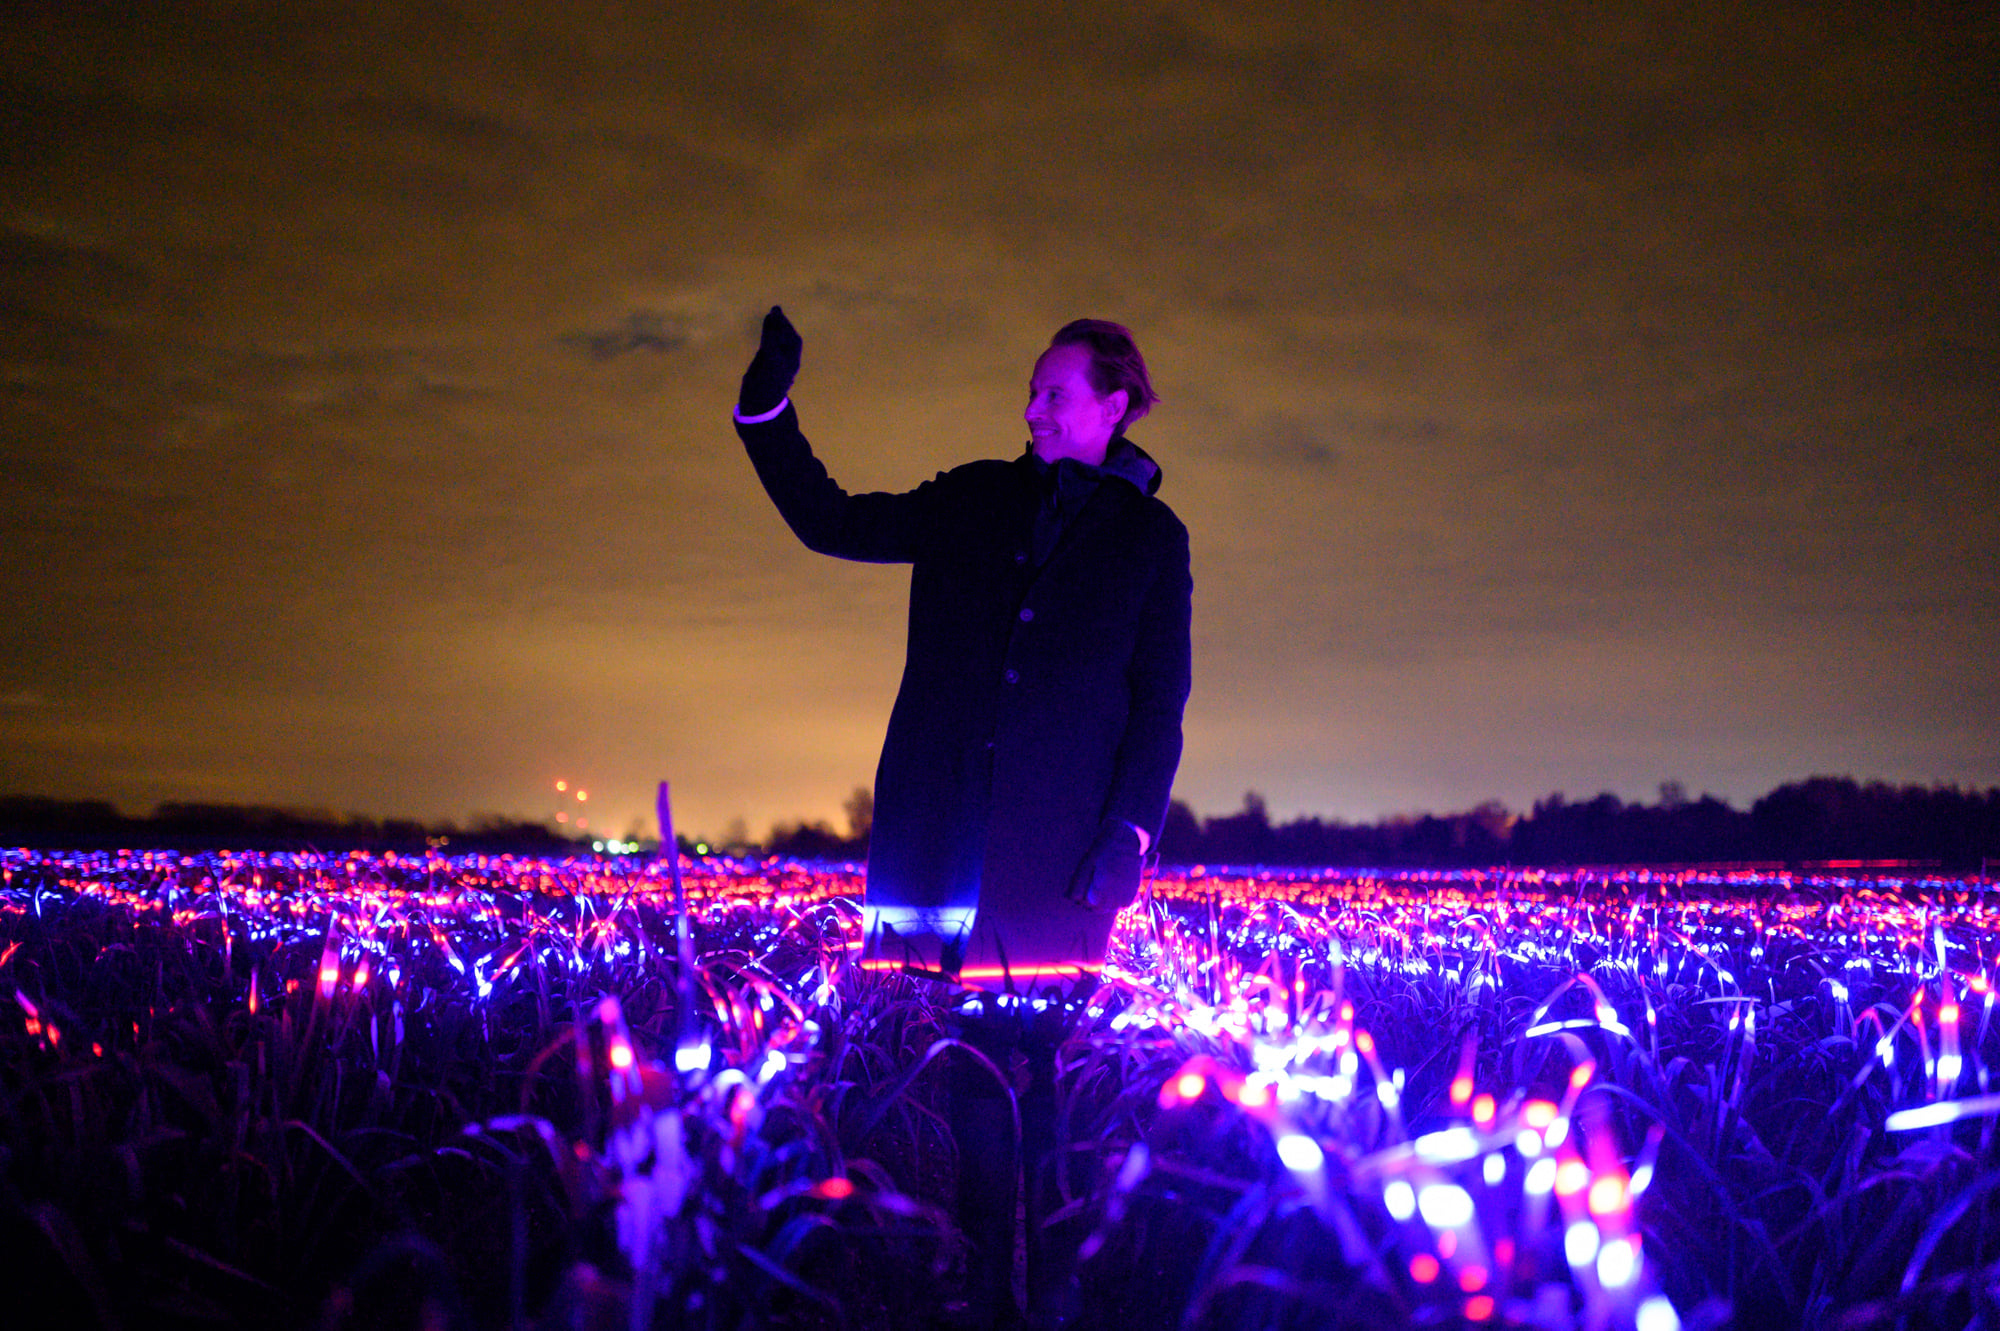 Wiebe Draijer, Chairman of the Managing Board, Rabobank: “It is really inspiring to work with an artist like Daan Roosegaarde on how to grow a better world together.”